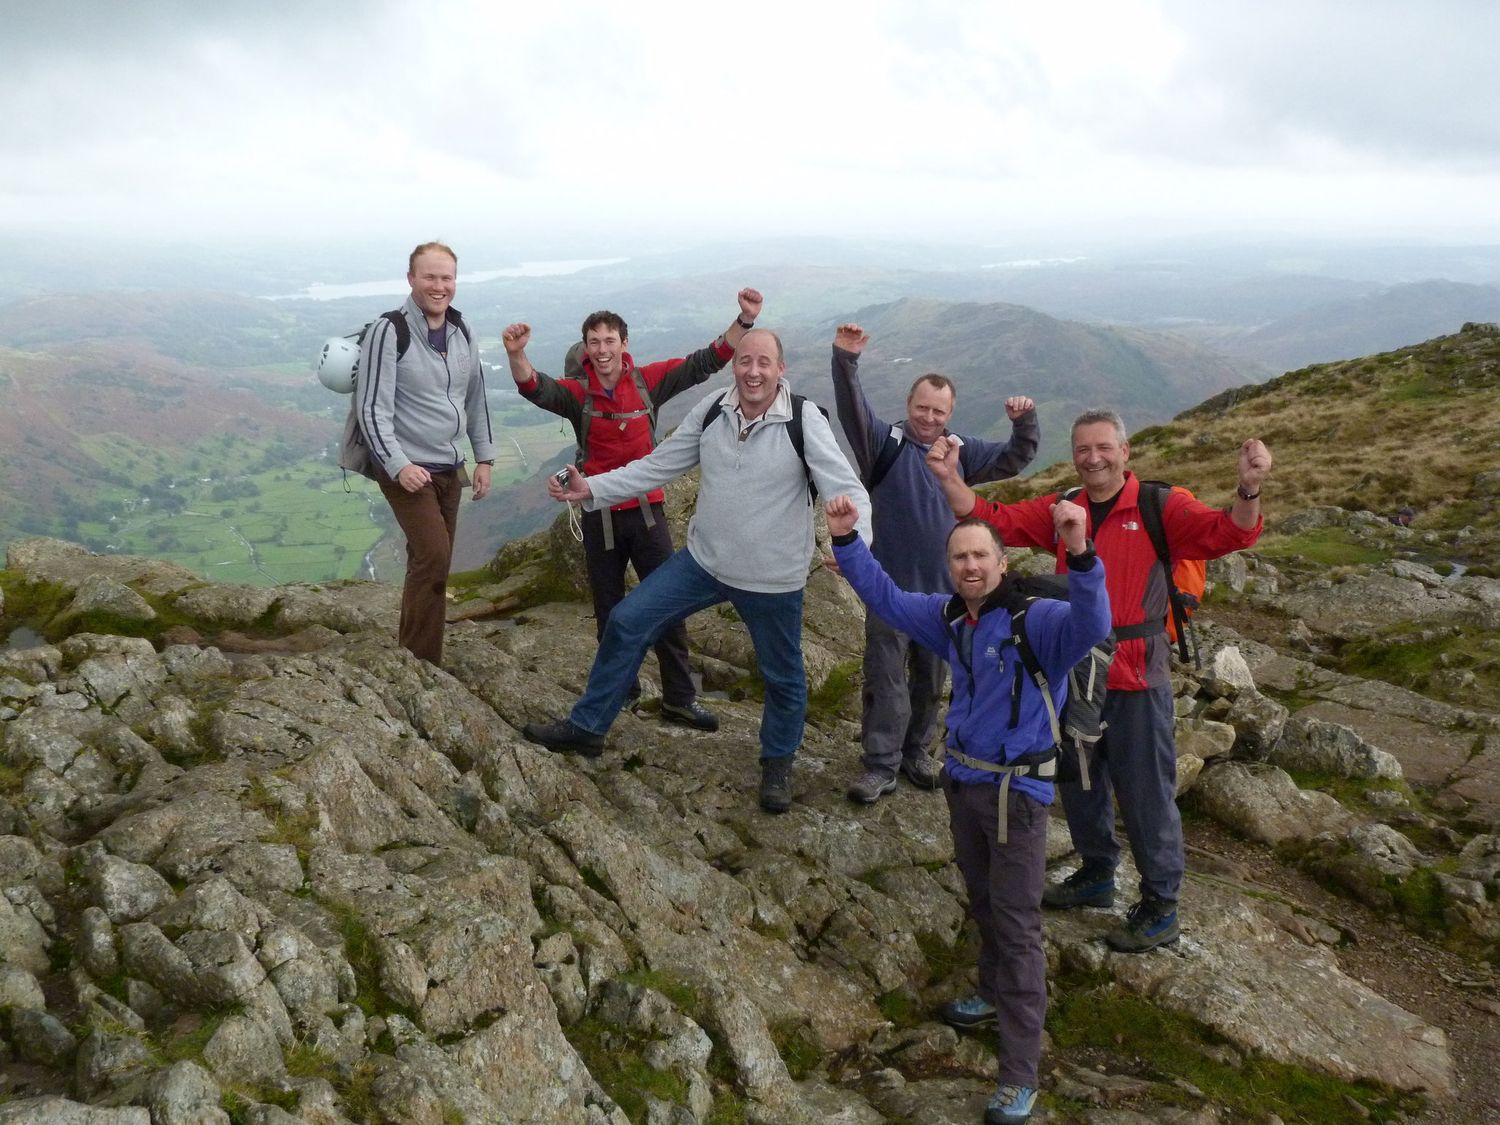  A group of clients celebrating success at the top of a rock climb - Chris Ensoll Mountain Guide 